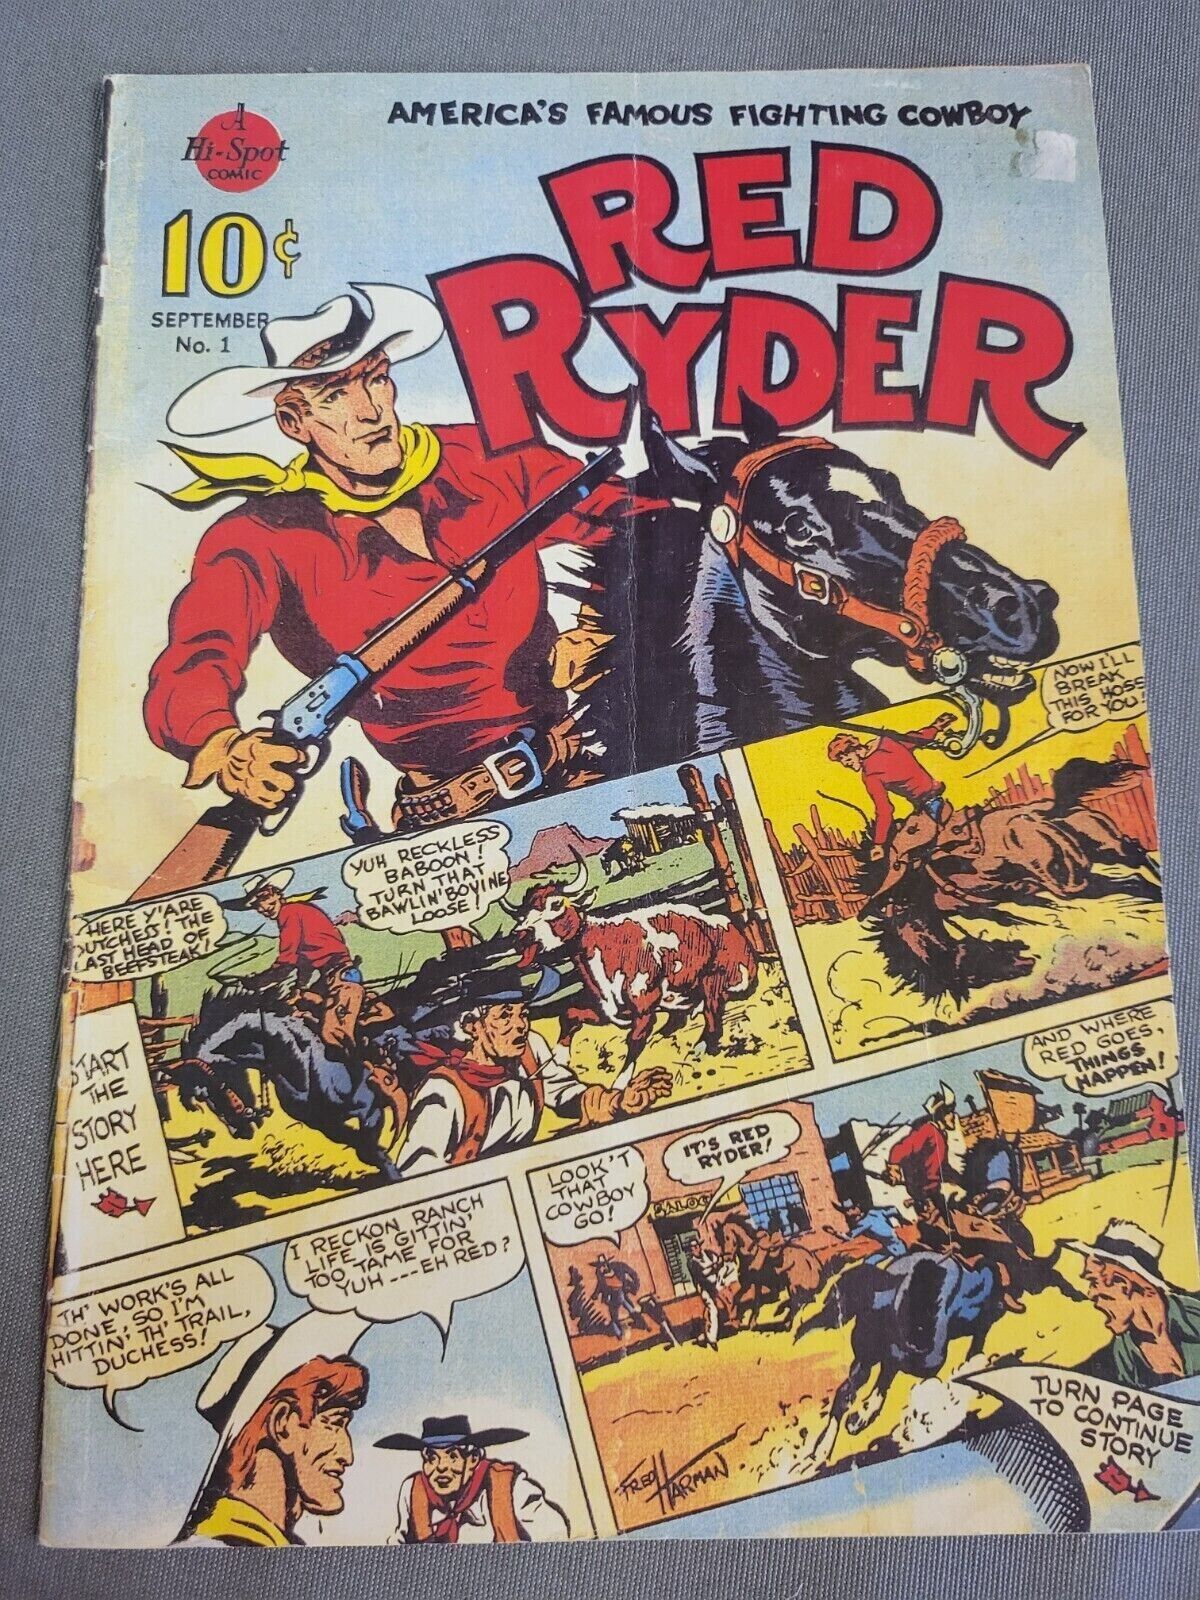 Red Ryder (1985, Hi-Spot Comic) Reprints Red Ryder Comic Strip from the 1940s